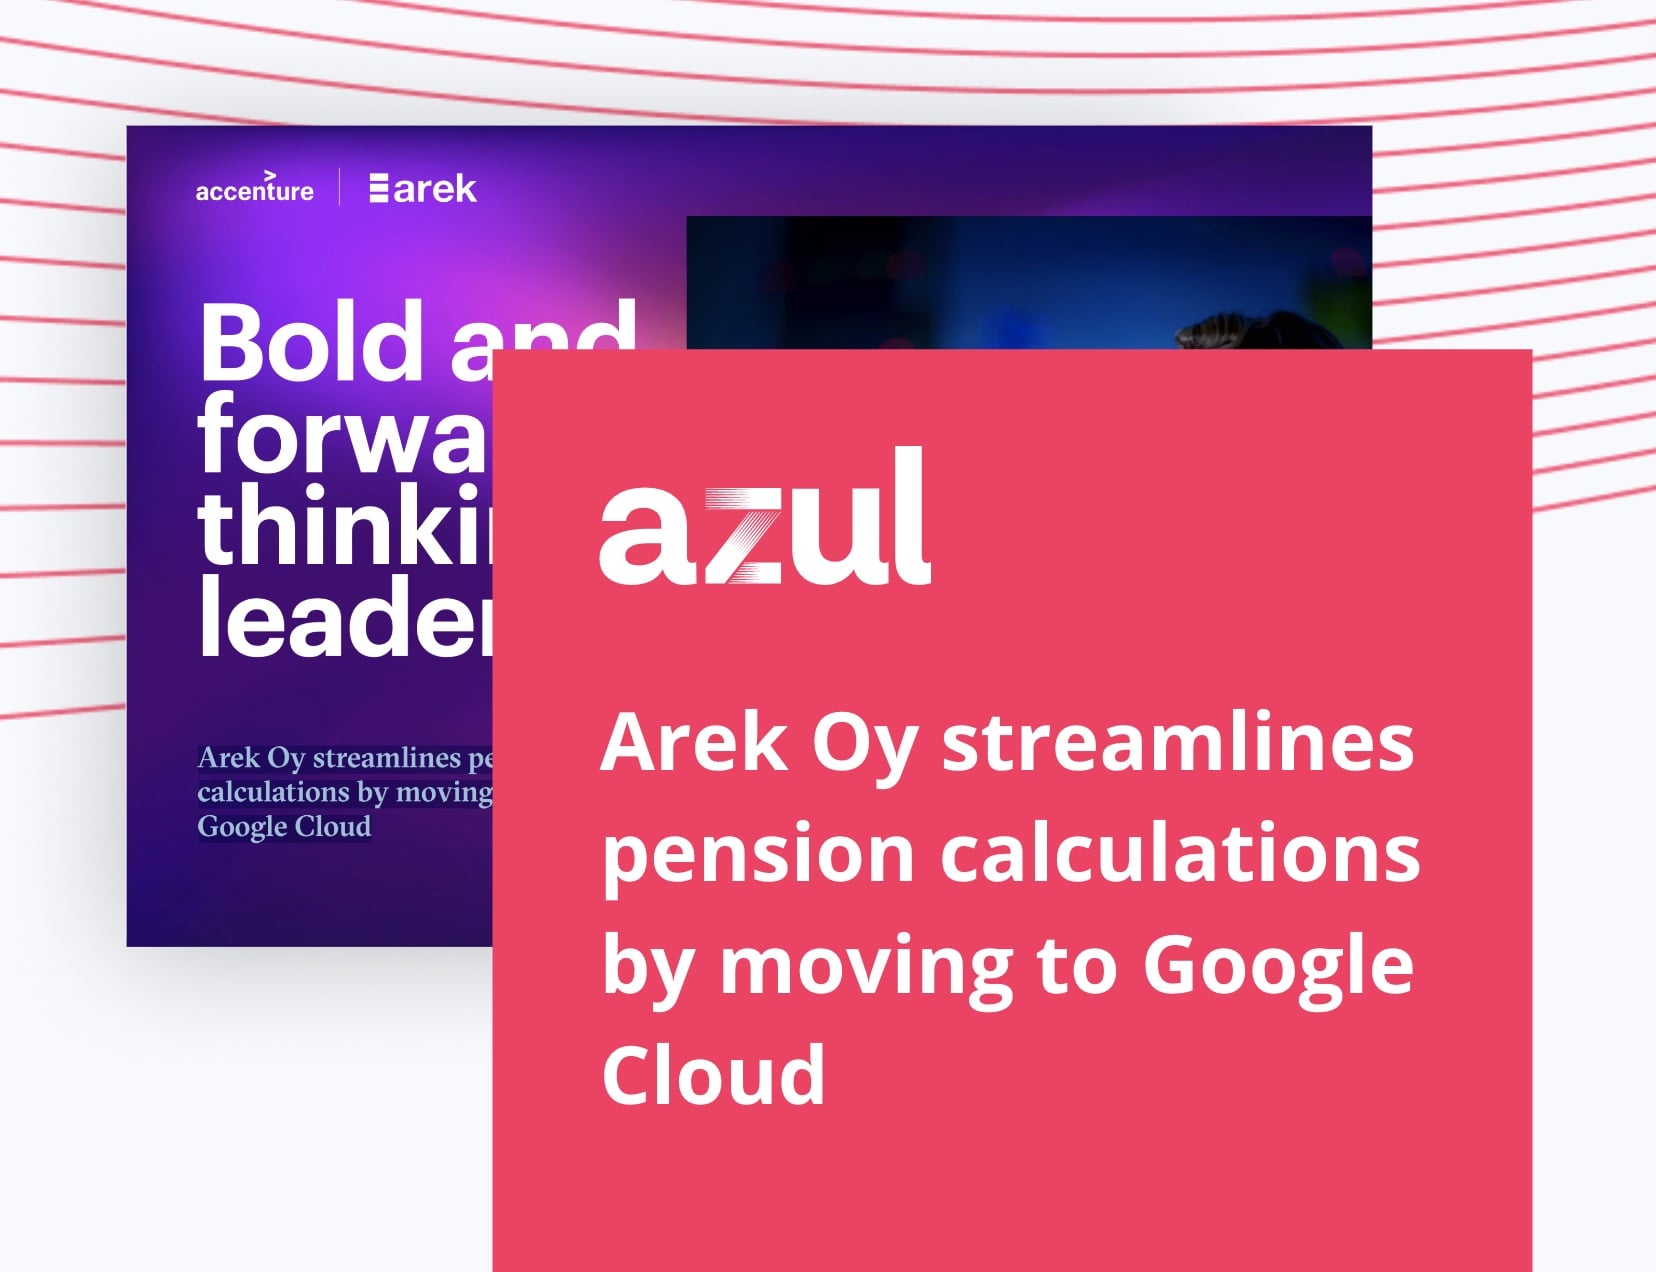 Arek Oy streamlines pension calculations by moving to Google Cloud